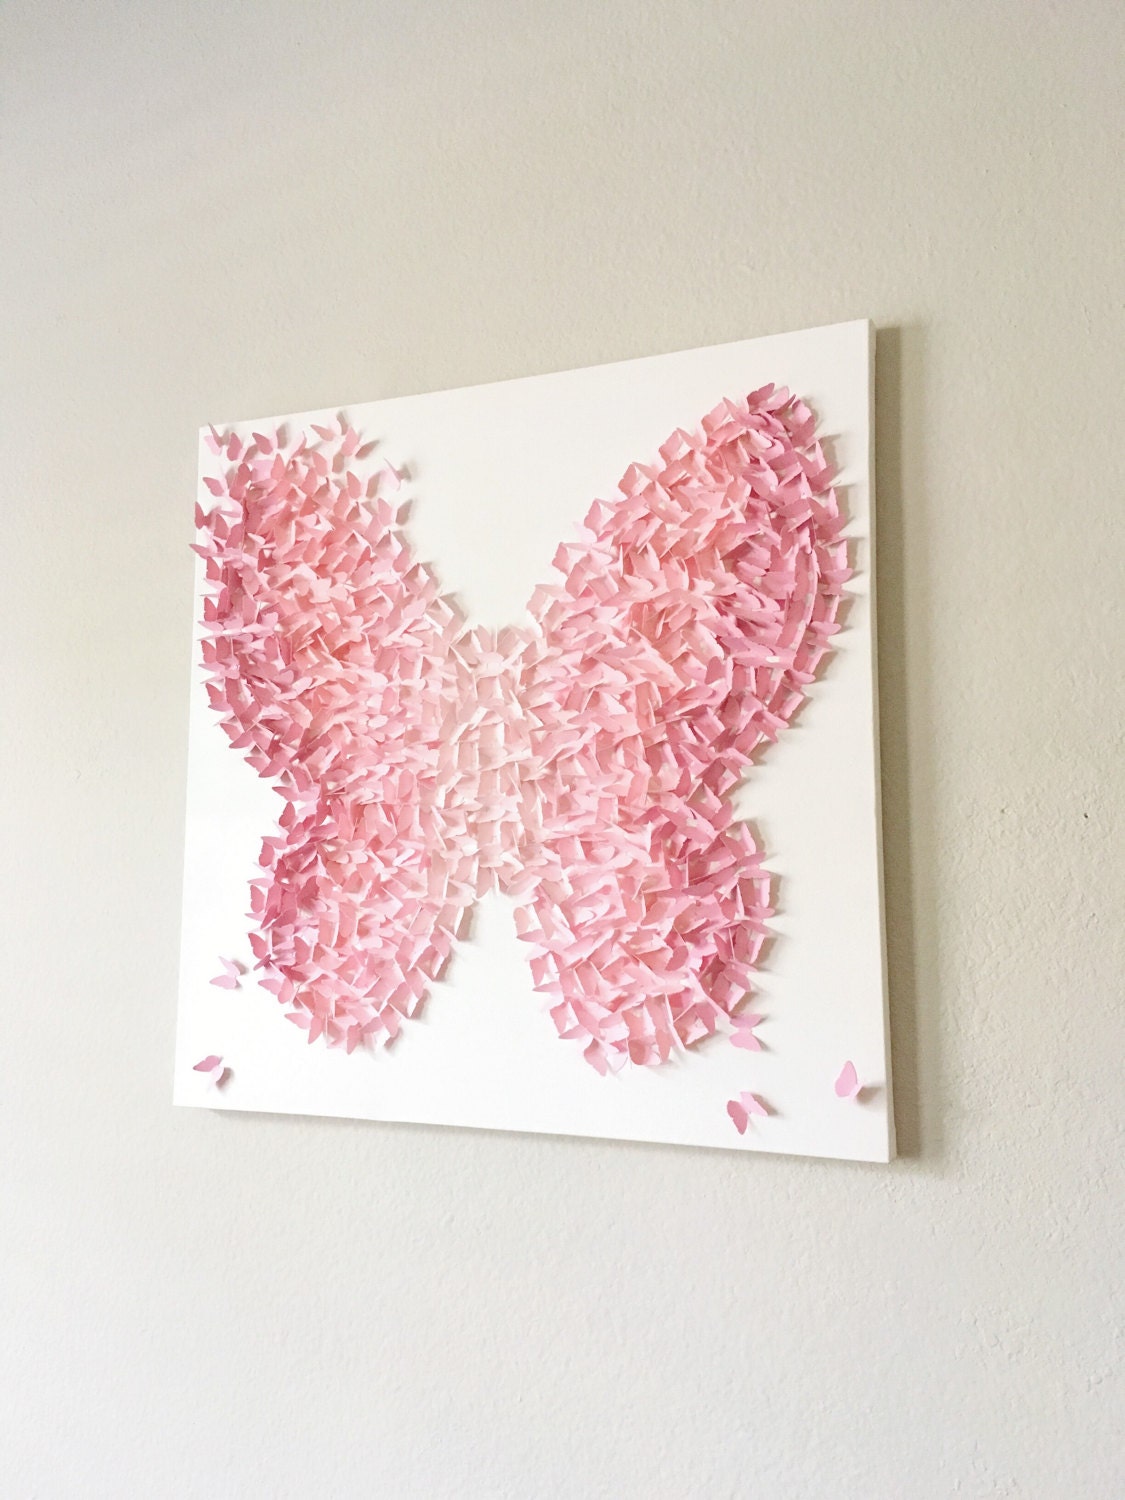 Soft Pink Butterfly On Canvas Made of Butterflies Wall Art | Etsy